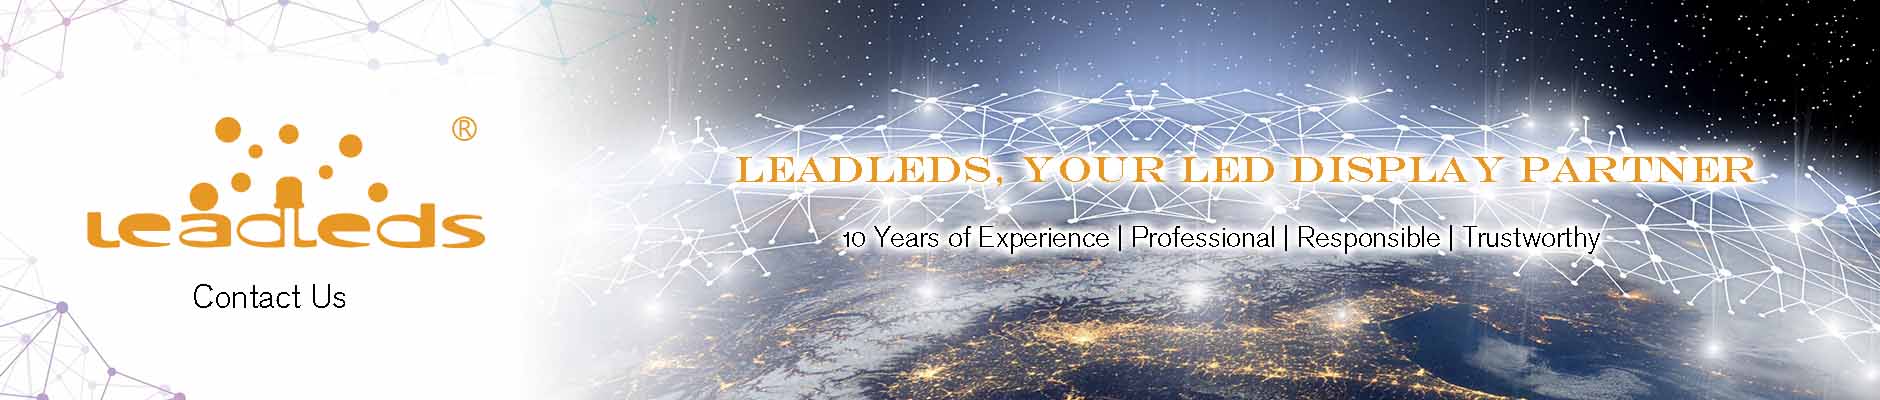 leadleds contact us